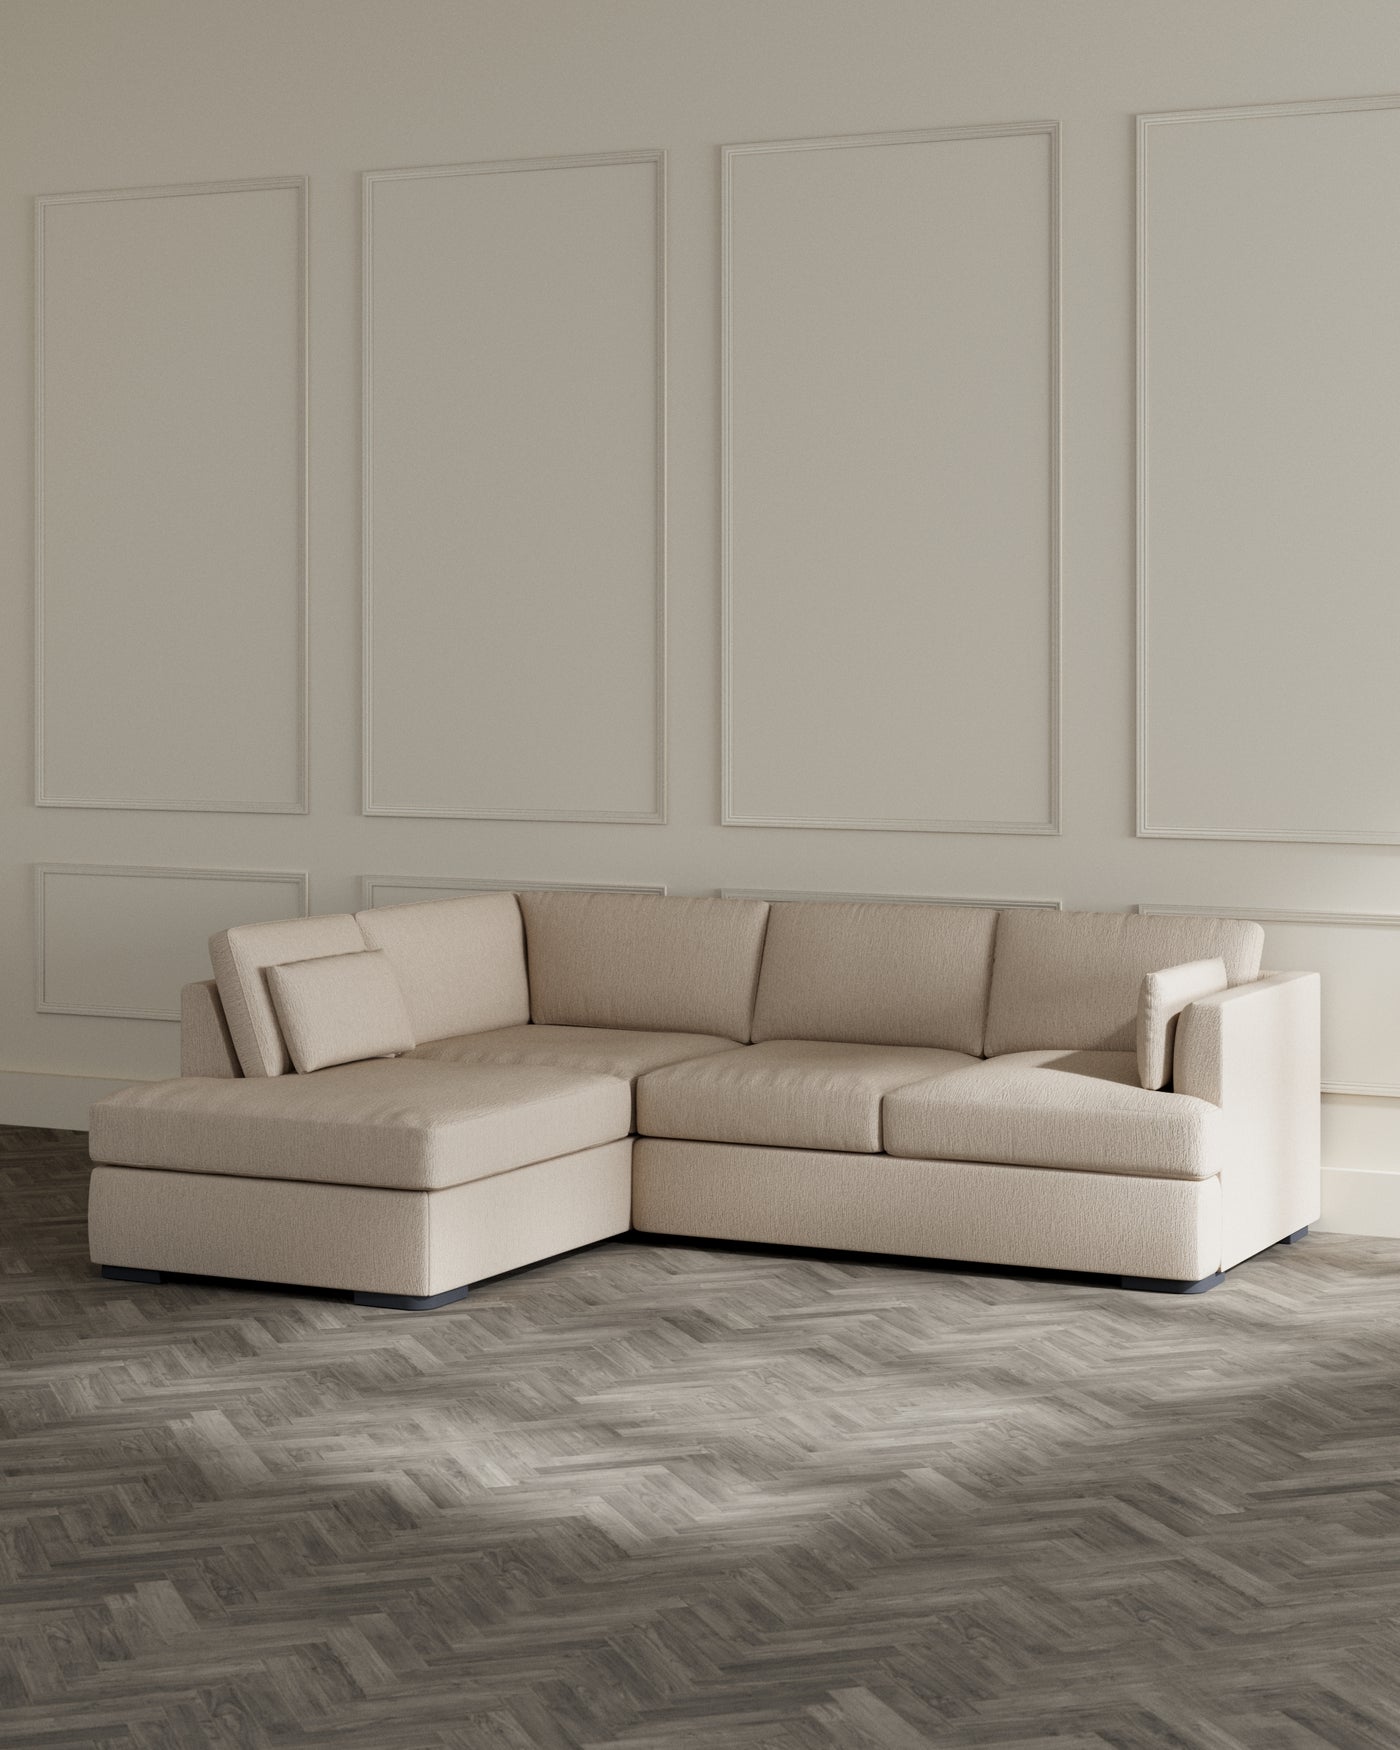 Contemporary L-shaped sectional sofa in a neutral beige fabric with plush cushions and a chaise lounge extension, positioned on a herringbone patterned wooden floor against a classic panelled wall.